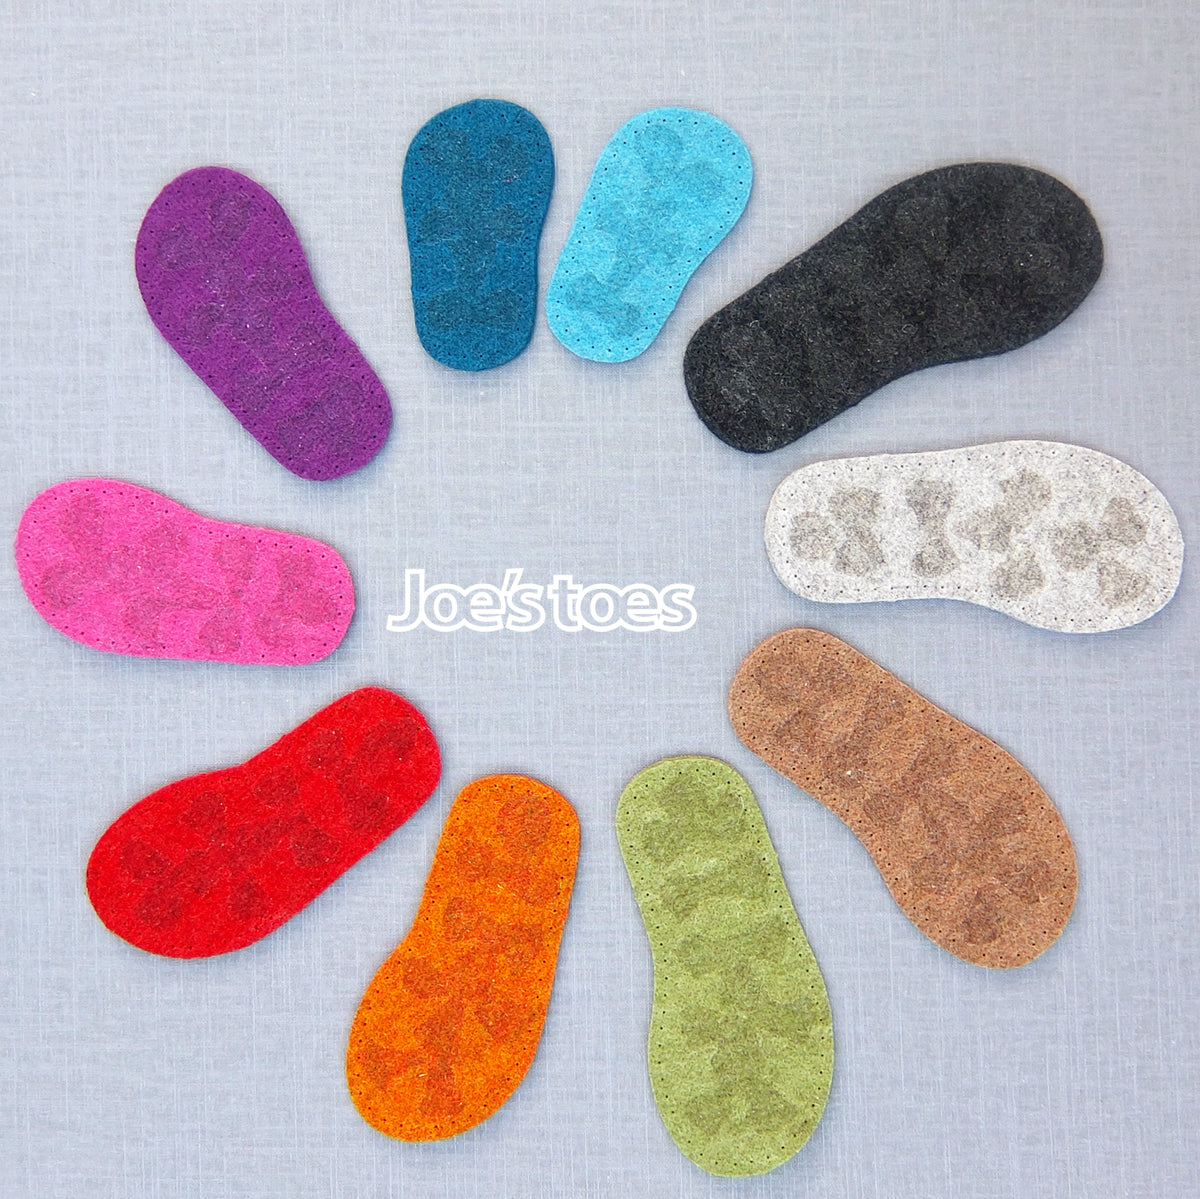 Felt Slipper with Latex Grip | Baby, Toddlers & – Joe's Toes US